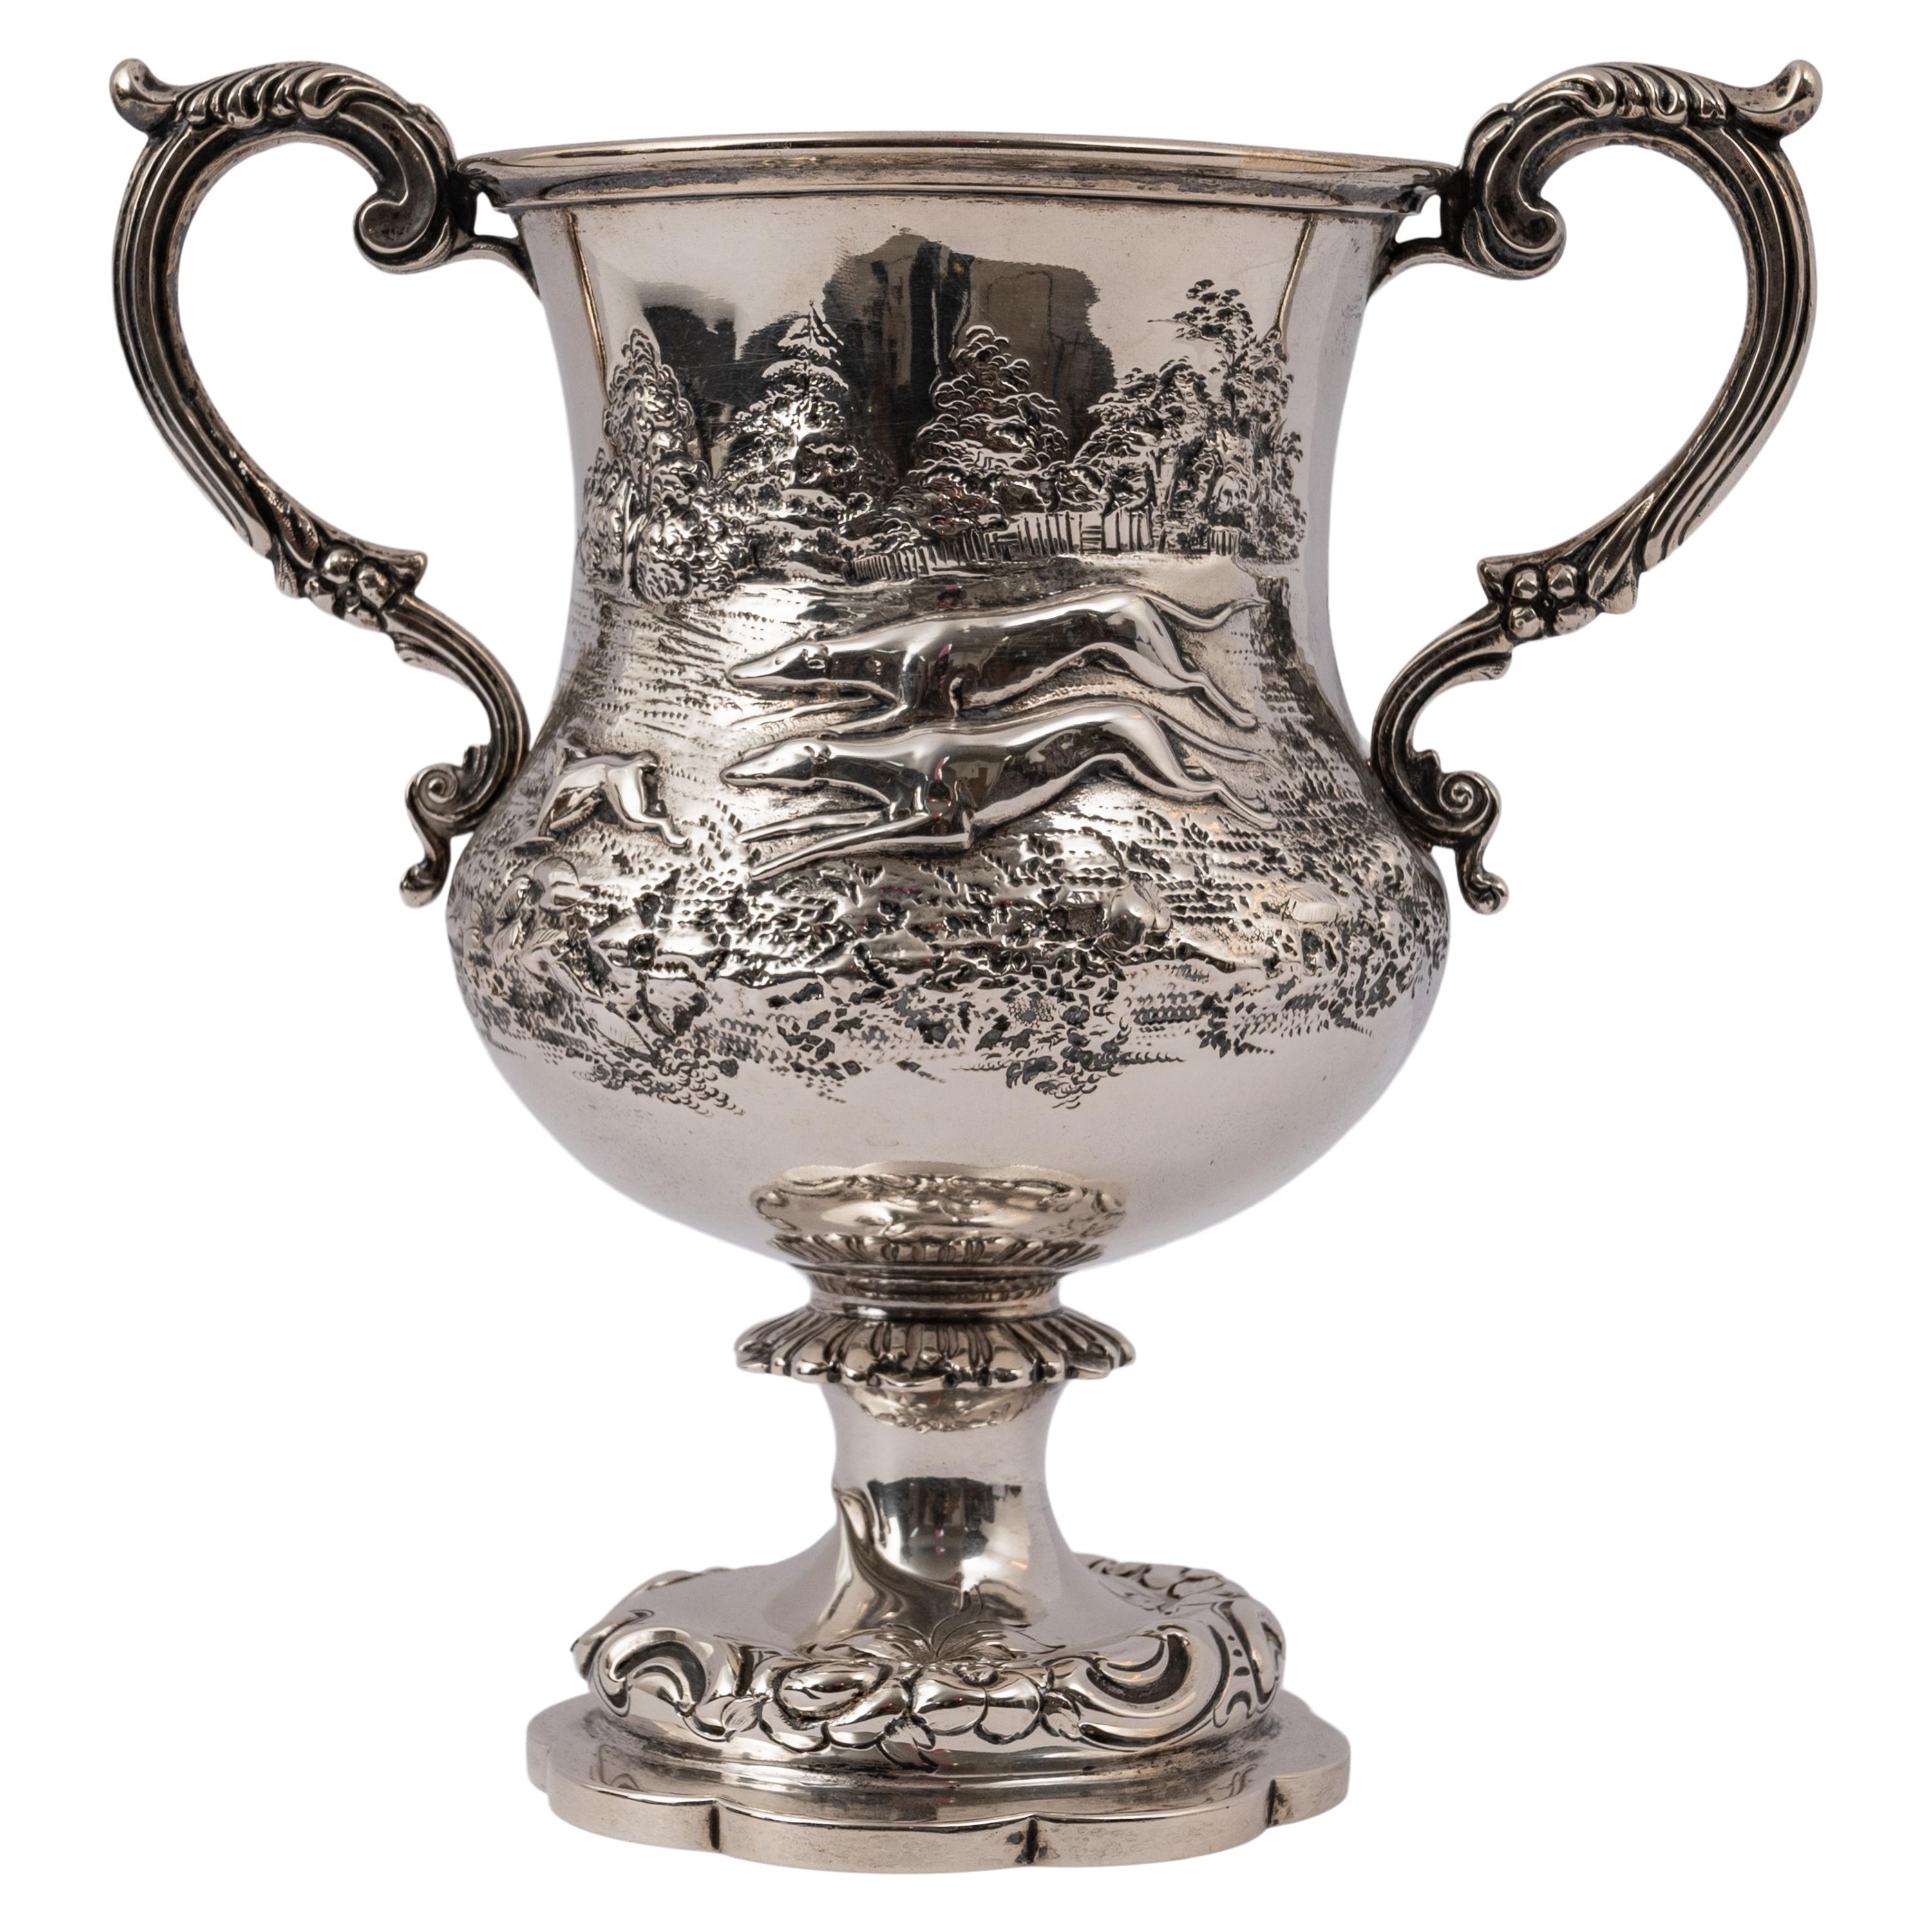 Repoussé Antique Irish Sterling Silver Chalice Dog Hare Coursing Hunting Trophy Dublin